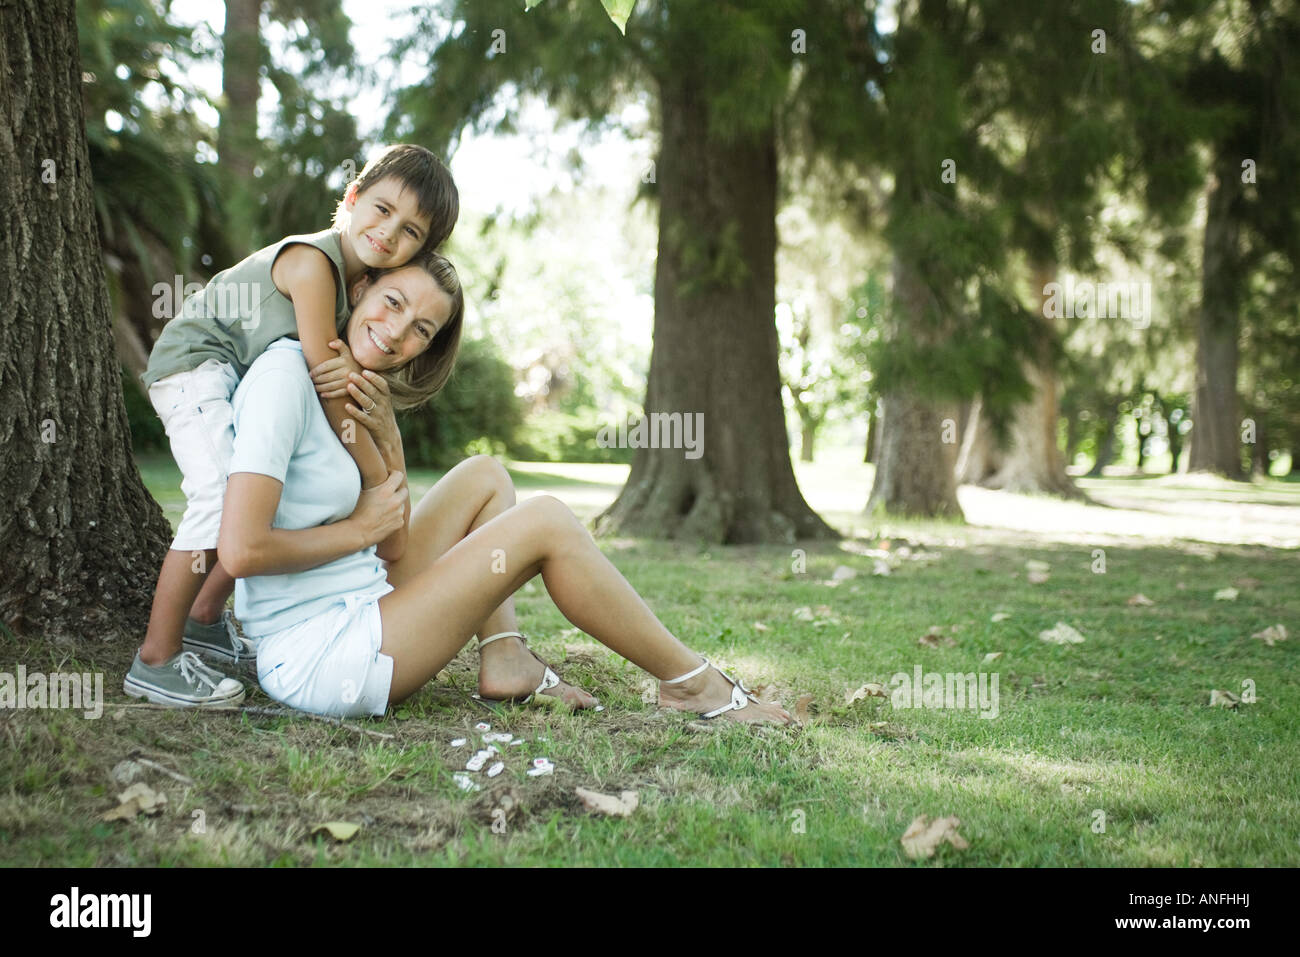 Mother and son sitting outdoors, boy hugging woman from behind Stock Photo